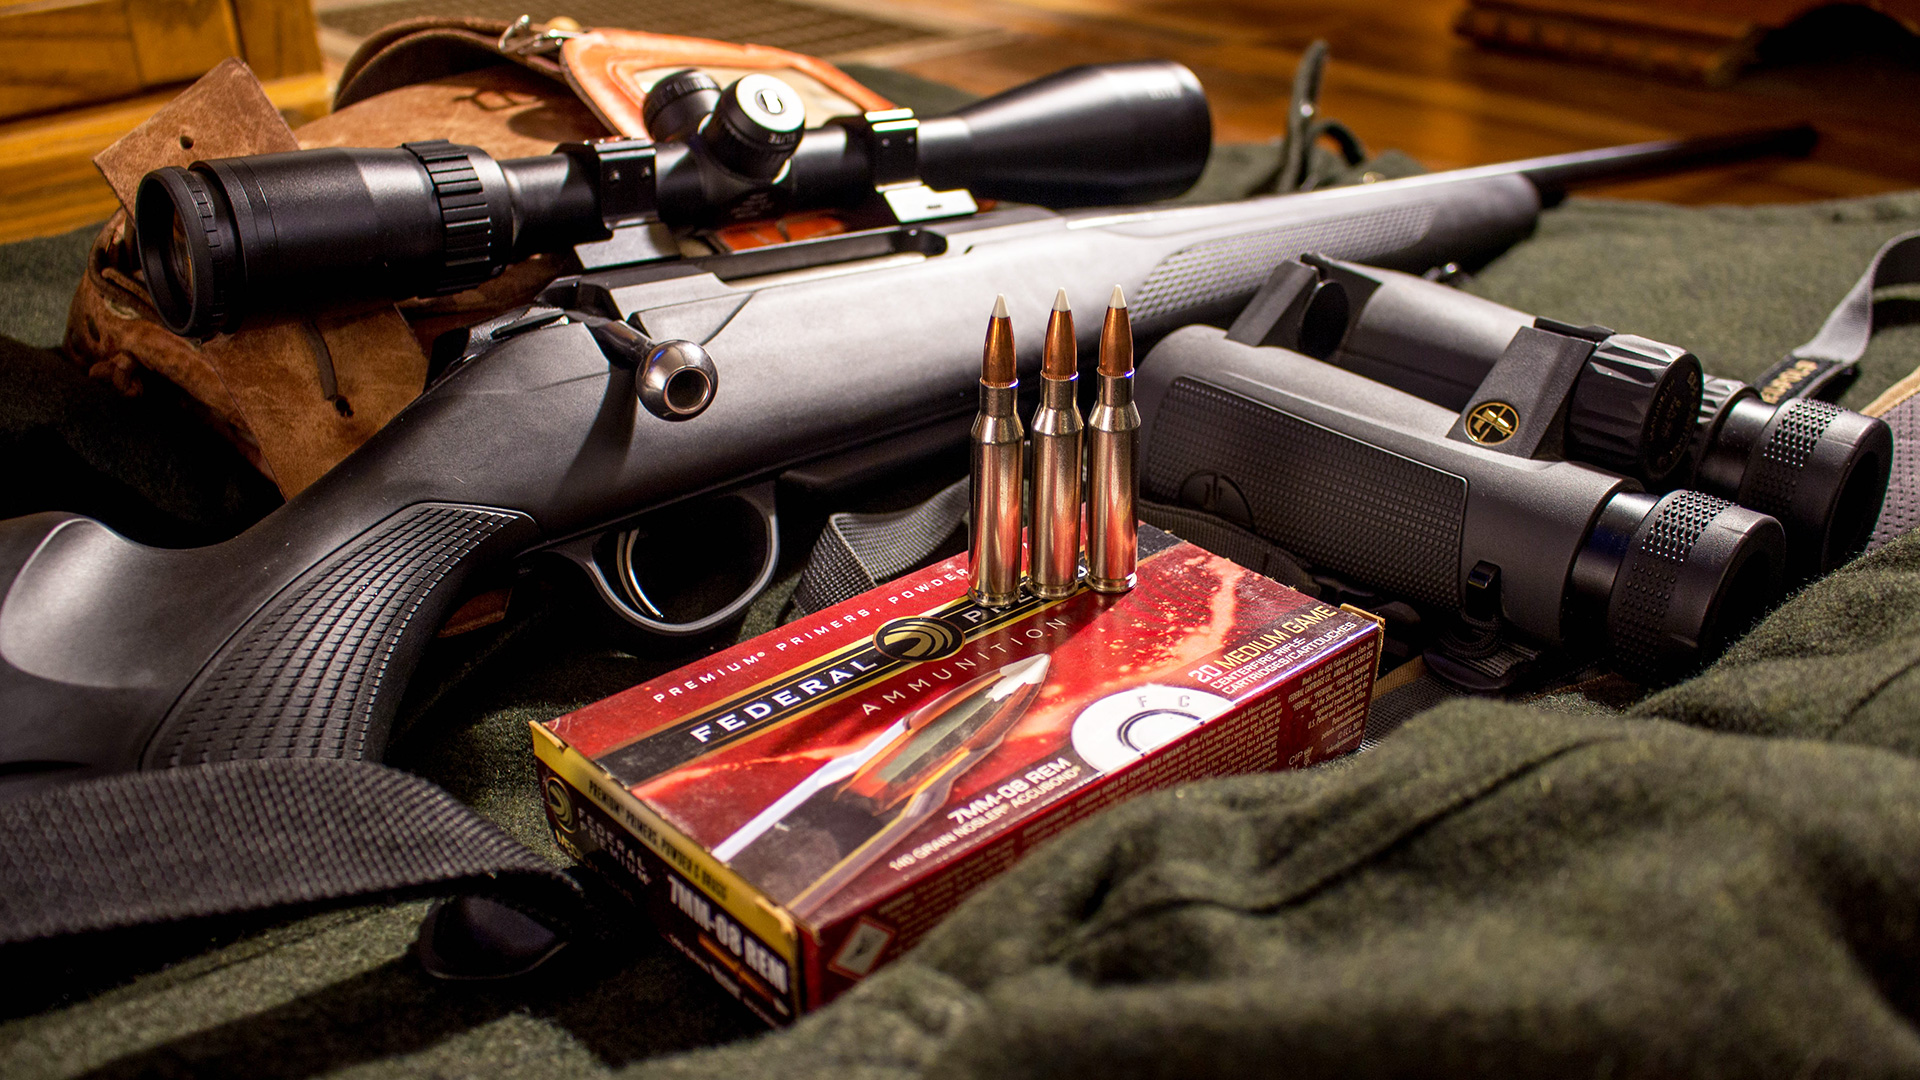 Glass Bedding A Rifle Stock  An Official Journal Of The NRA